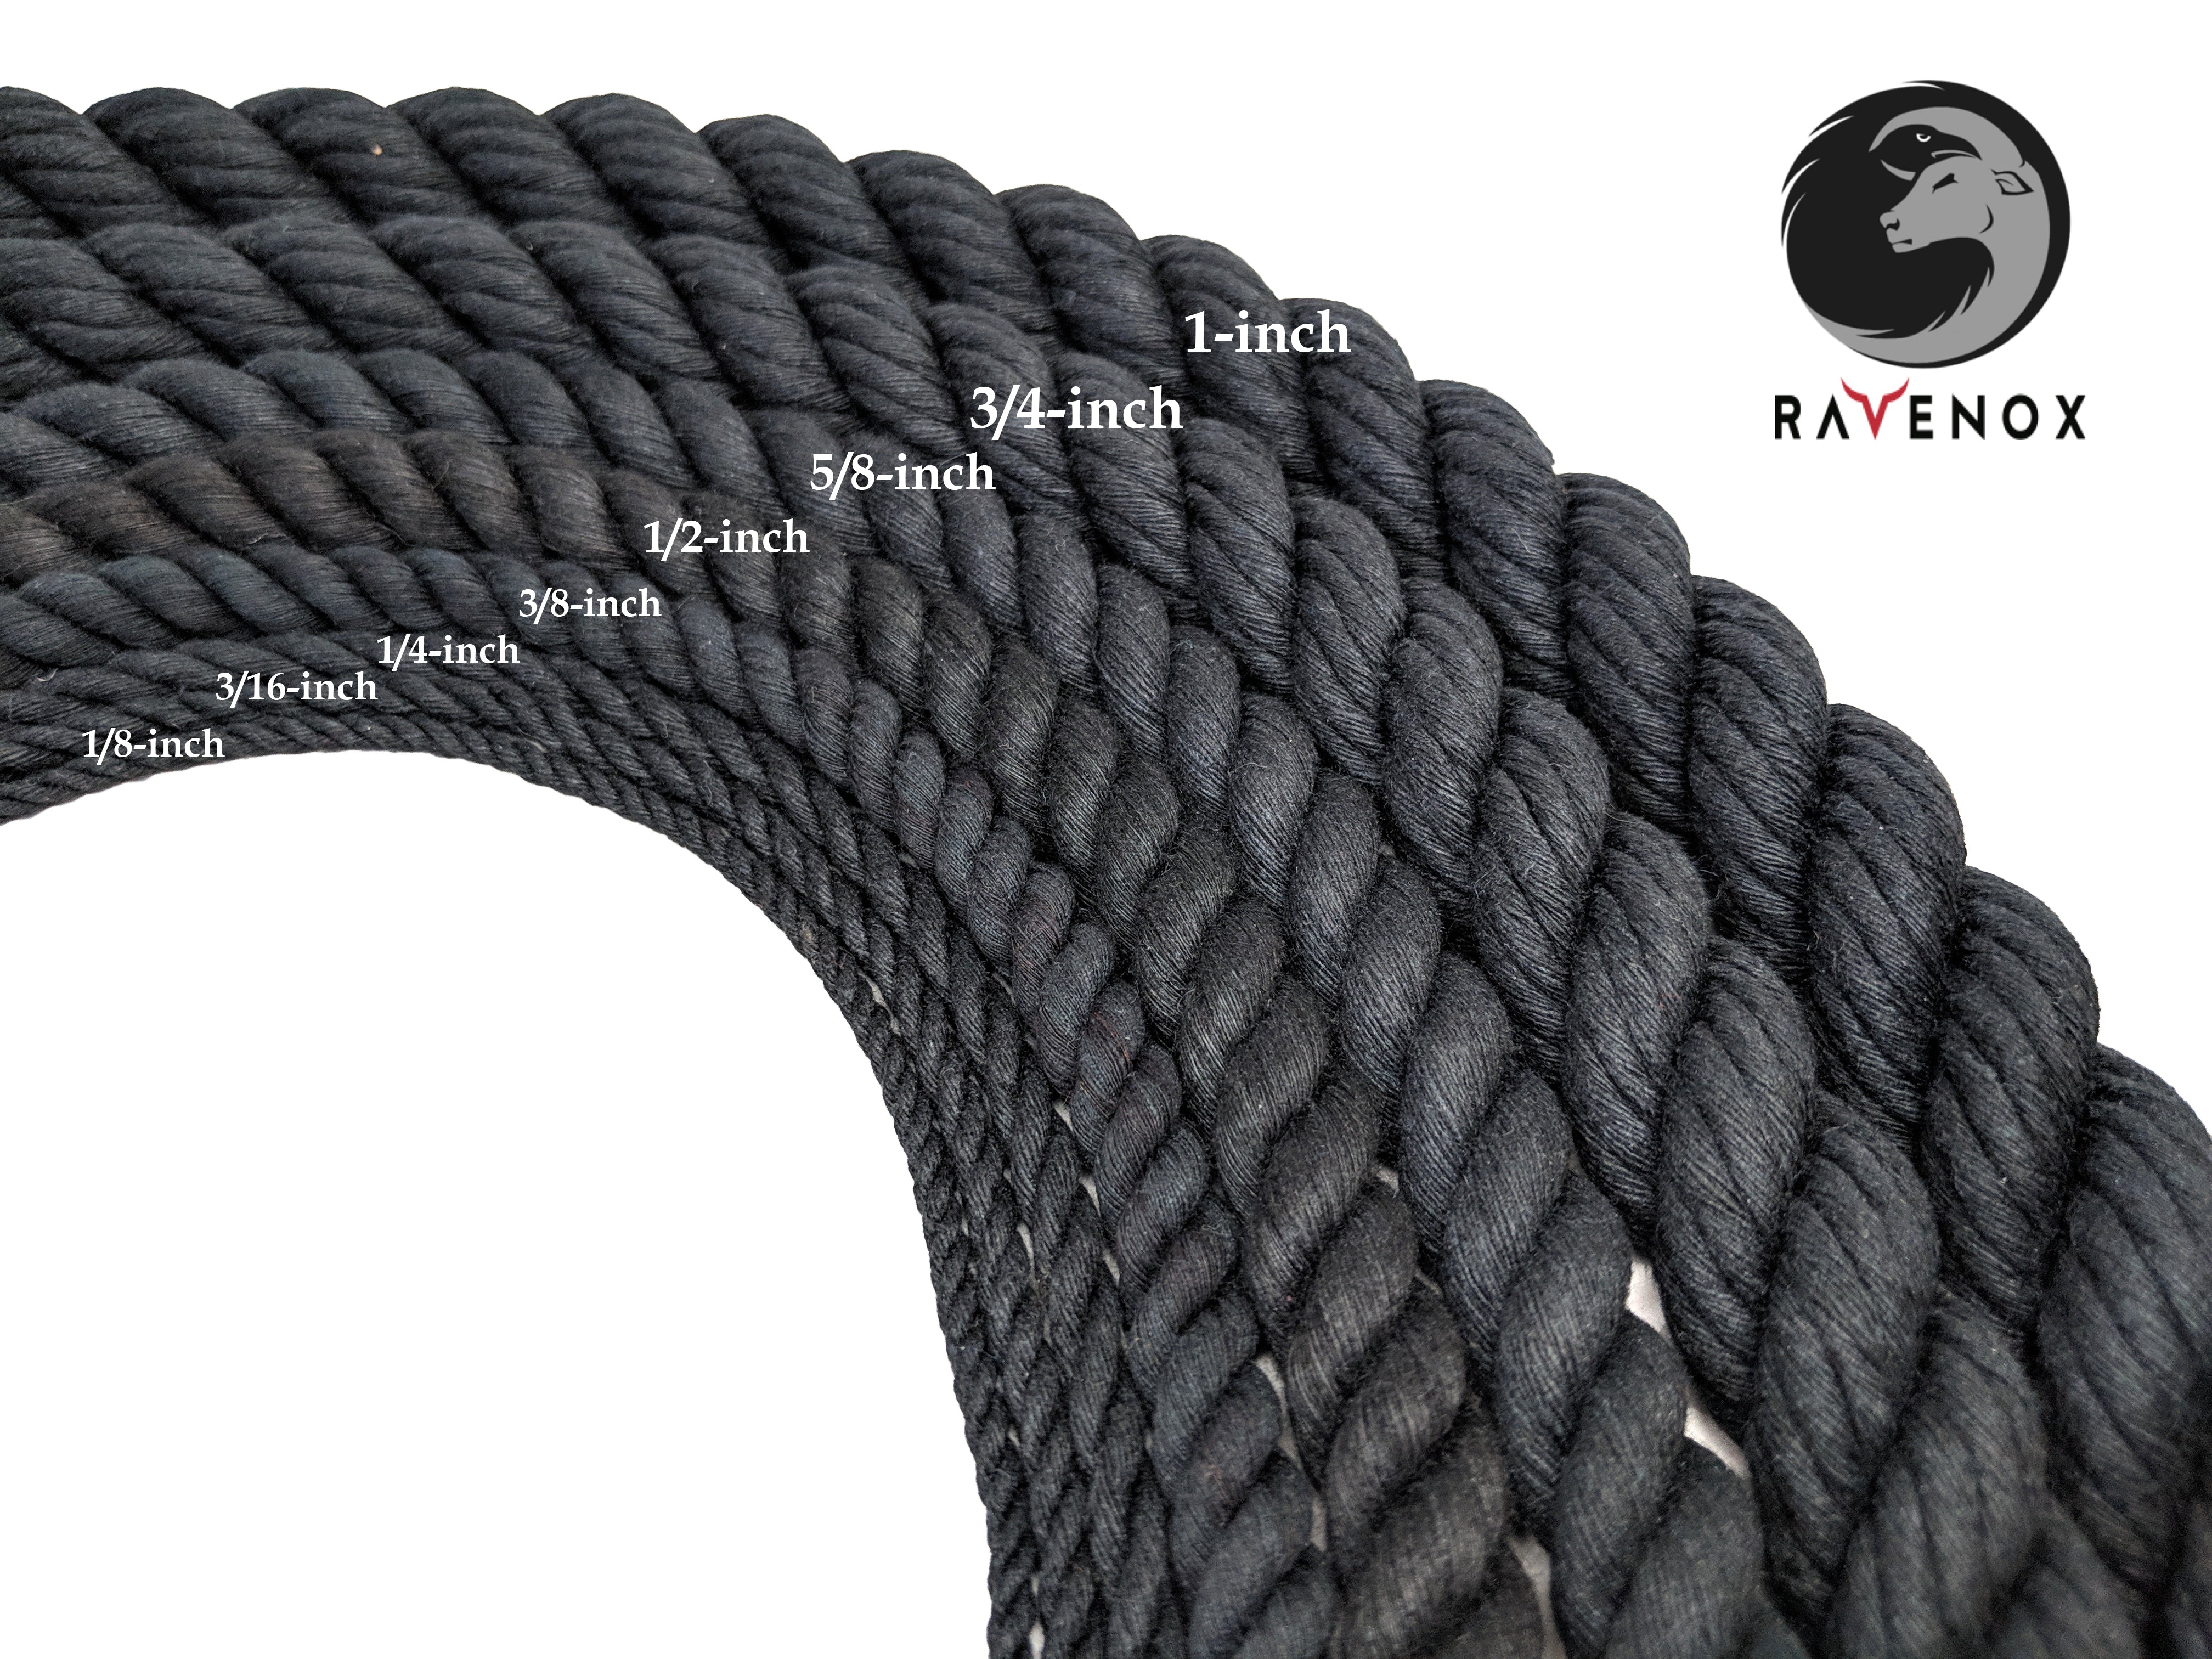 Black, 1/4 Inch x 25 Feet Super Soft 3 Strand Twisted Cotton Rope 